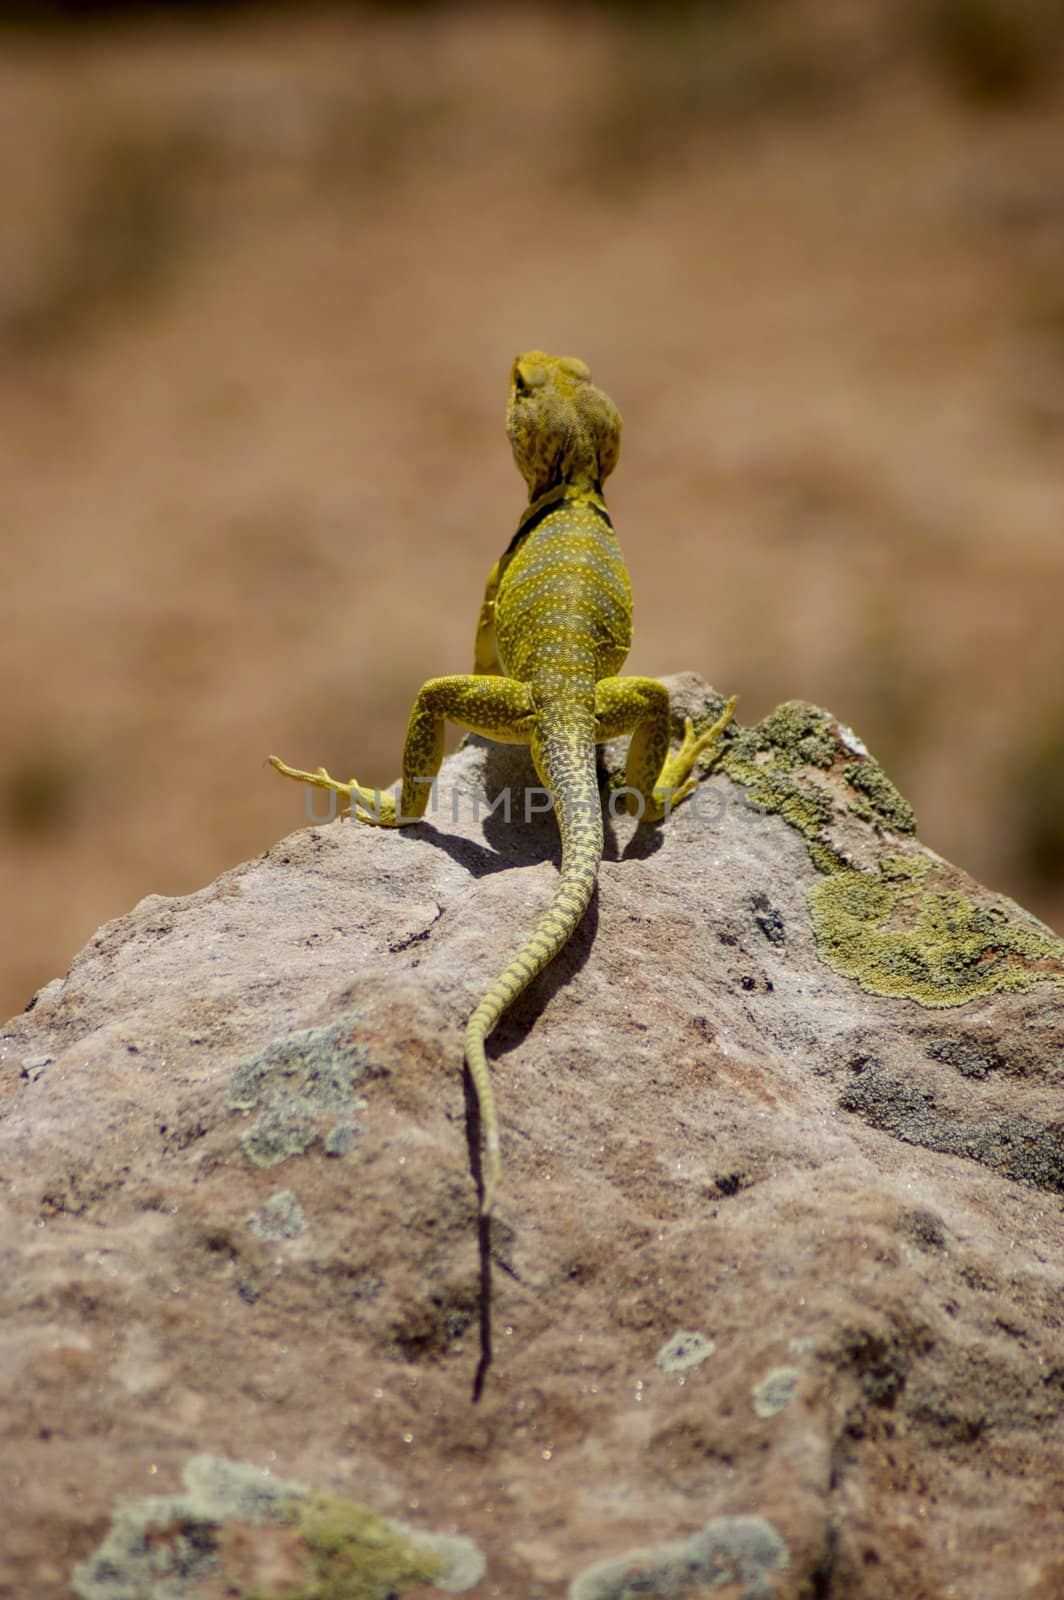 Close up of a yellow lizard/ gecko taken from the back as it sits on a desert rock in New Mexico